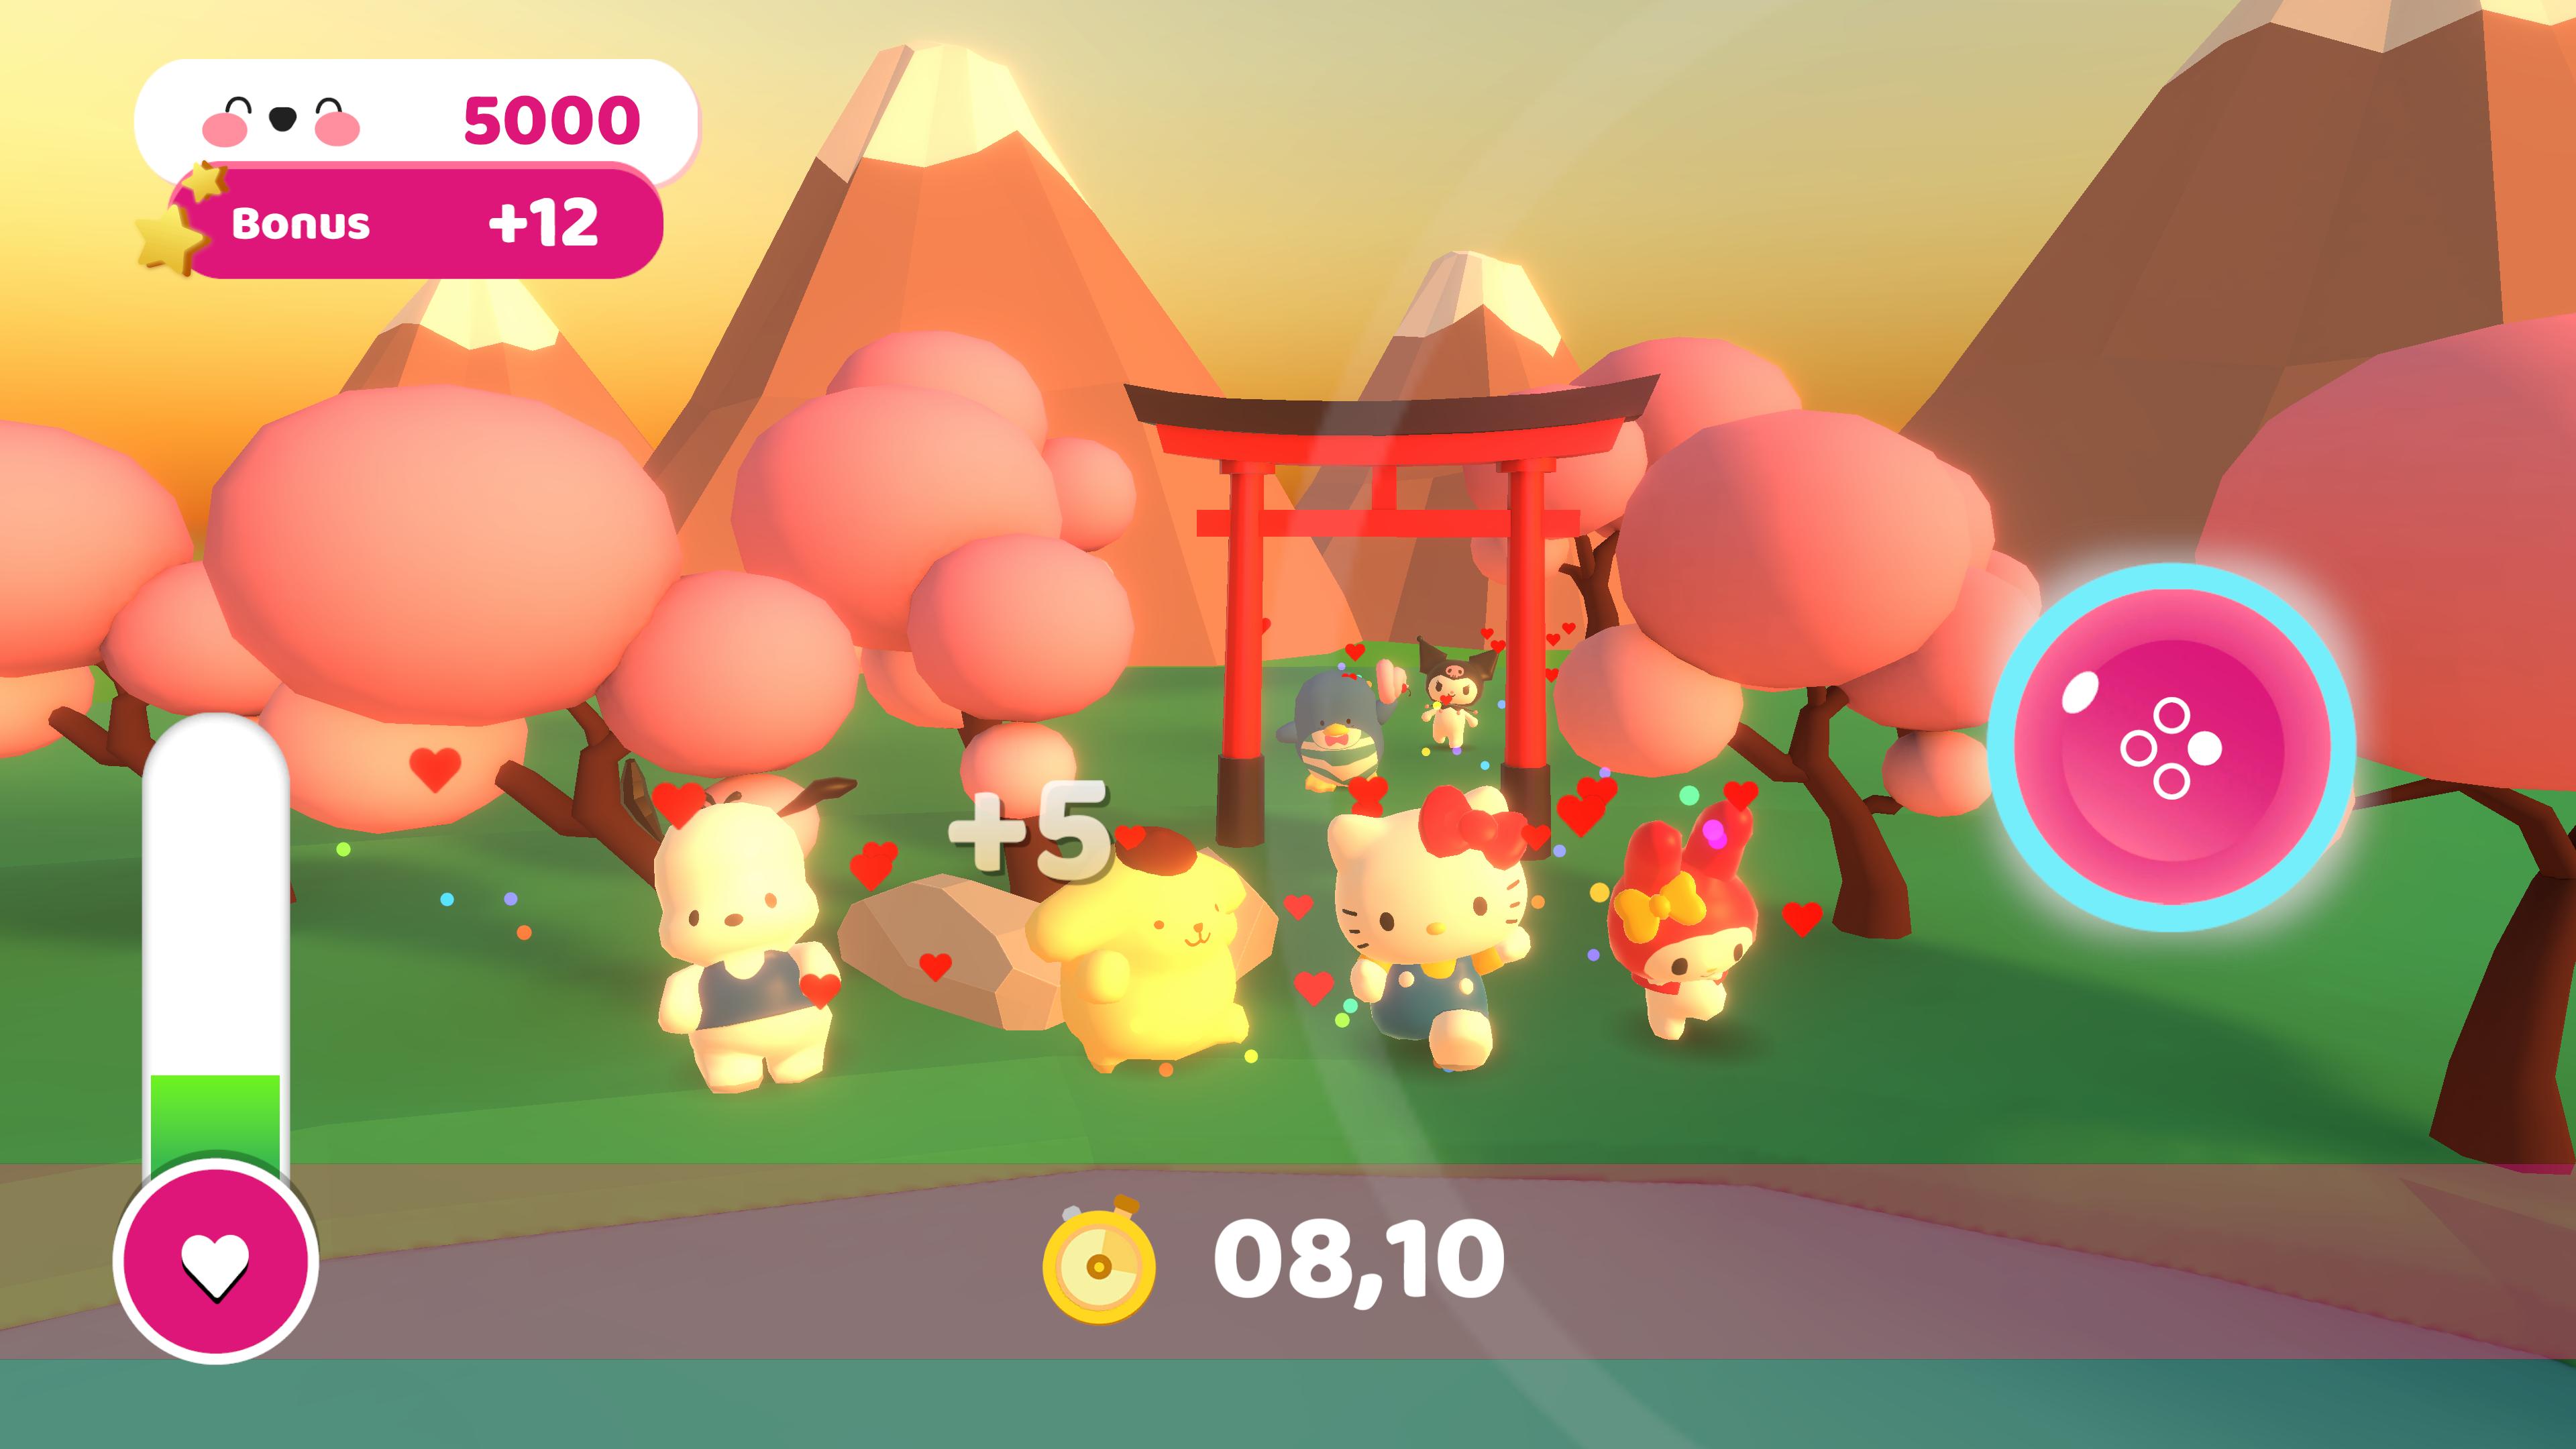 Hello Kitty and Friends: Happiness Parade - Game Support